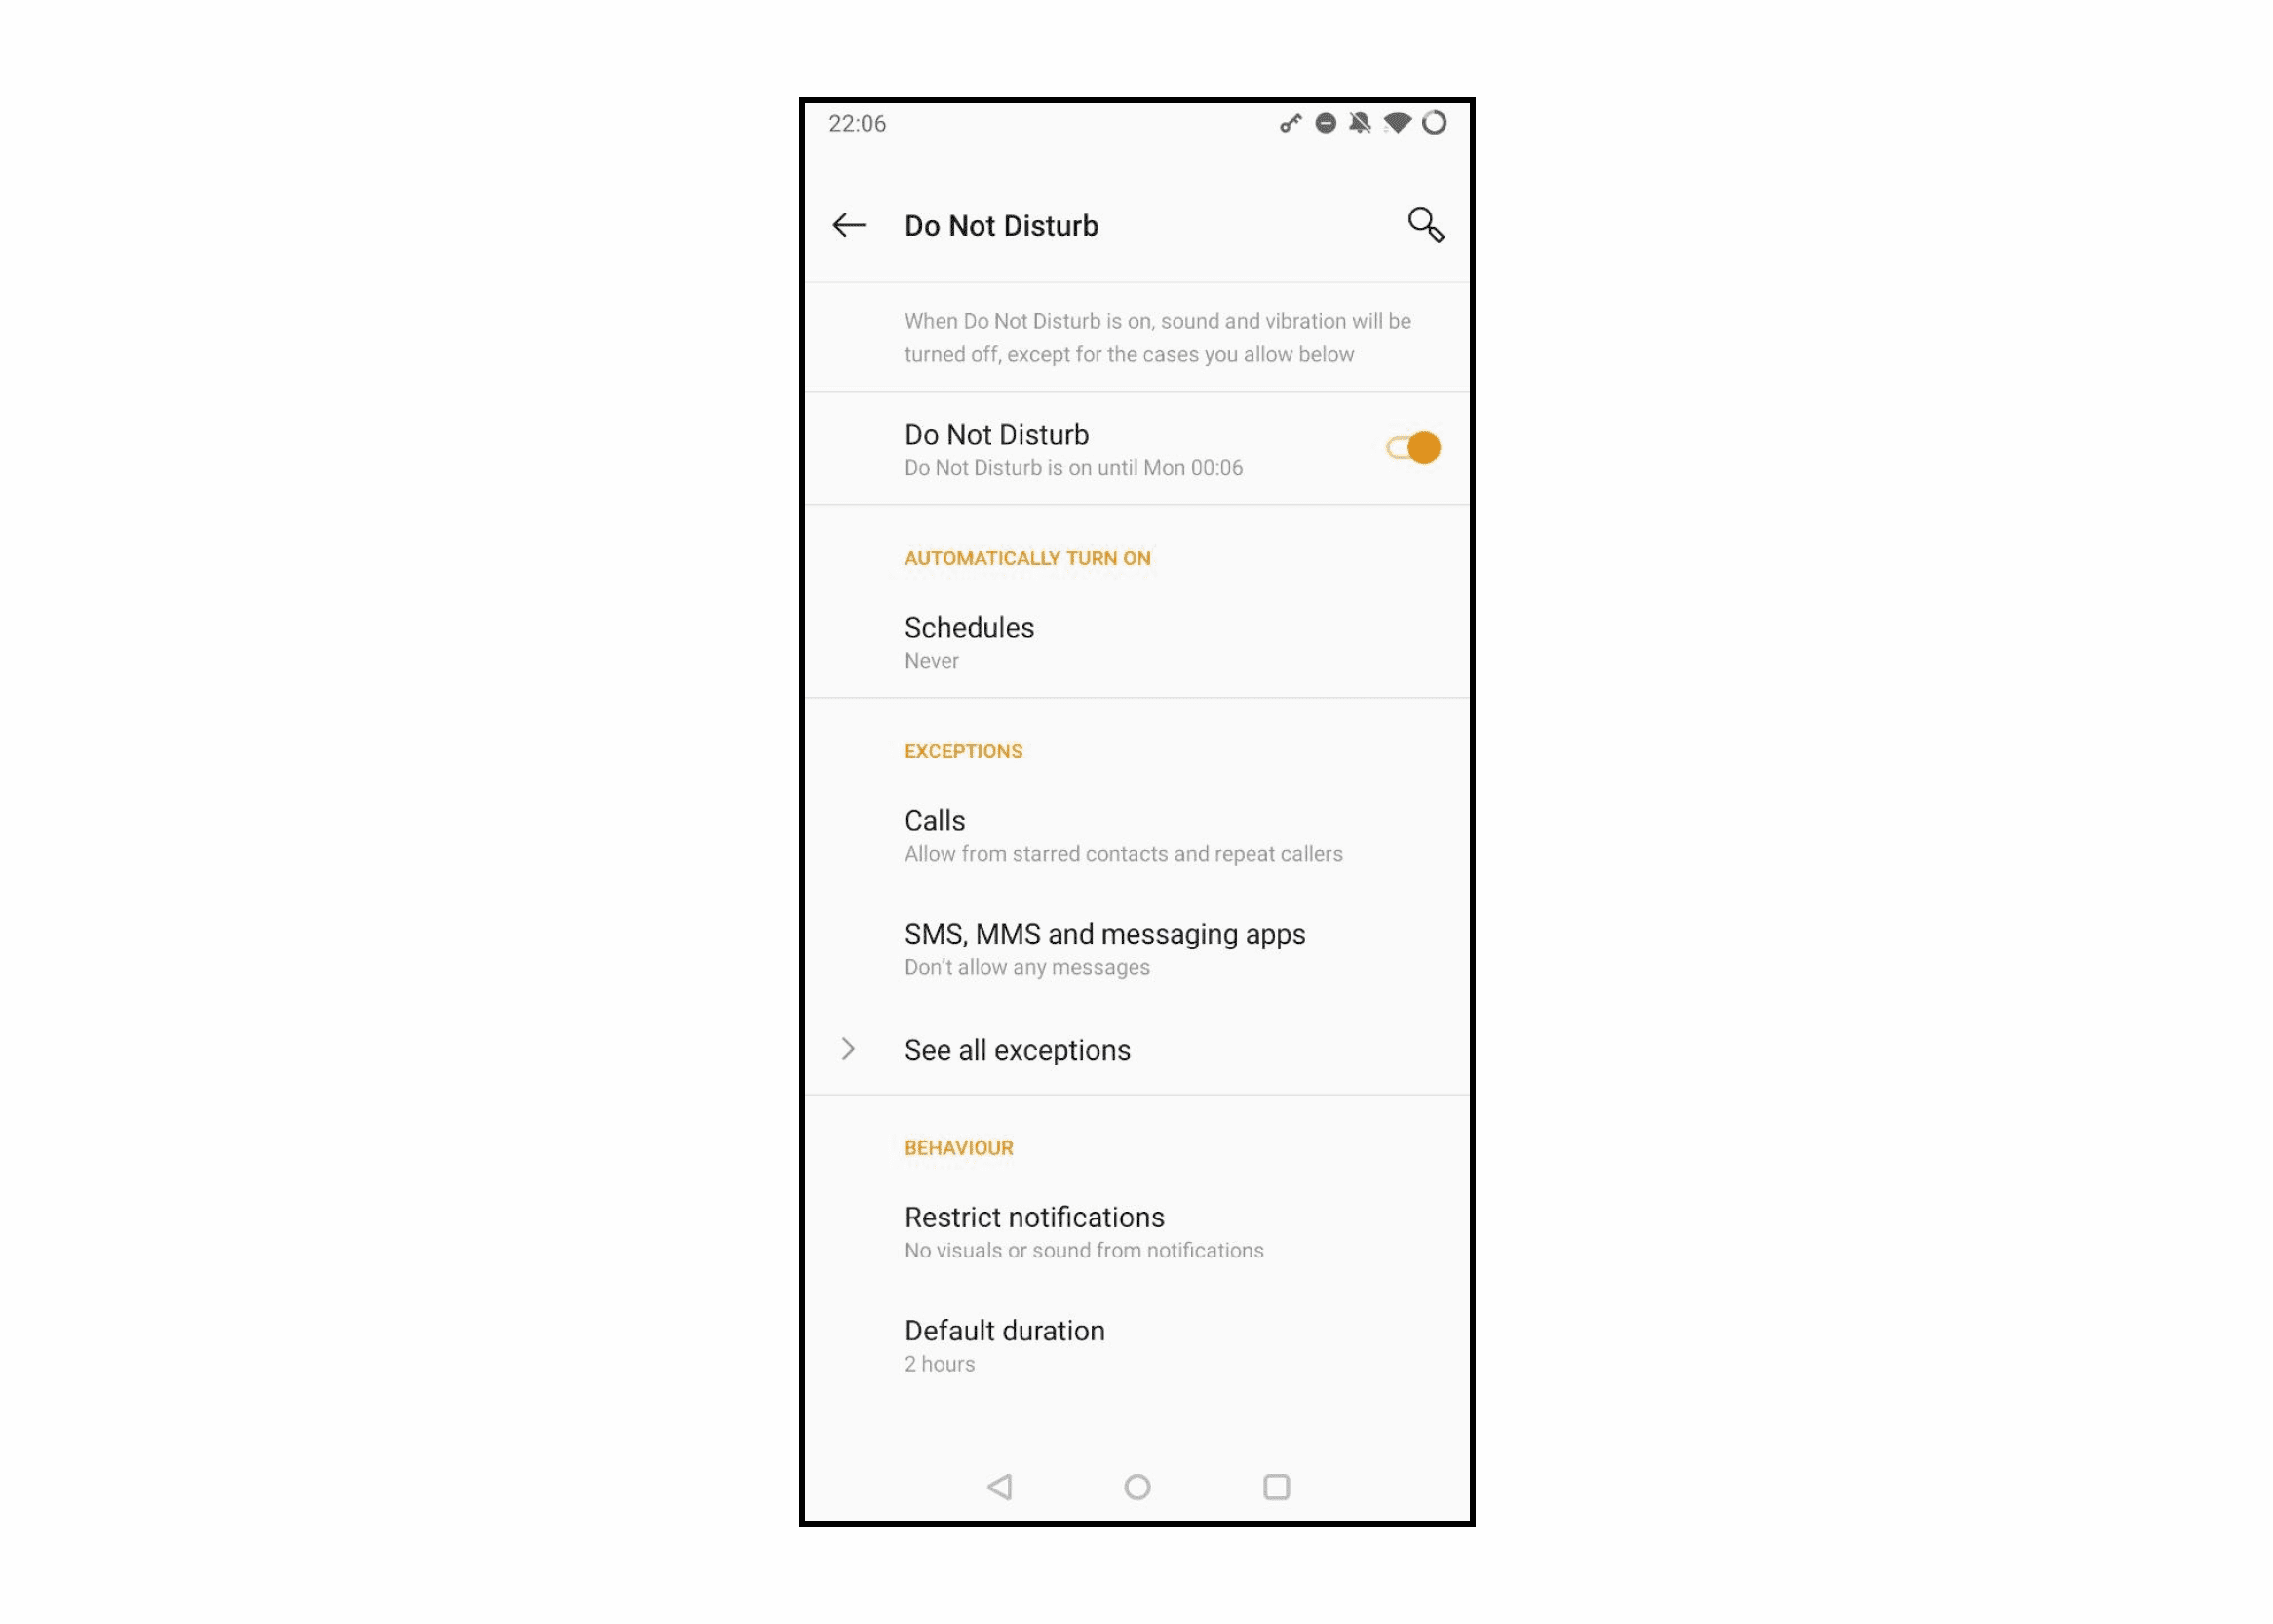 Screenshot from my phone’s “Do not disturb” settings, with the many options it offers: automatically turn on at a scheduled time, exceptions, behaviour, etc.